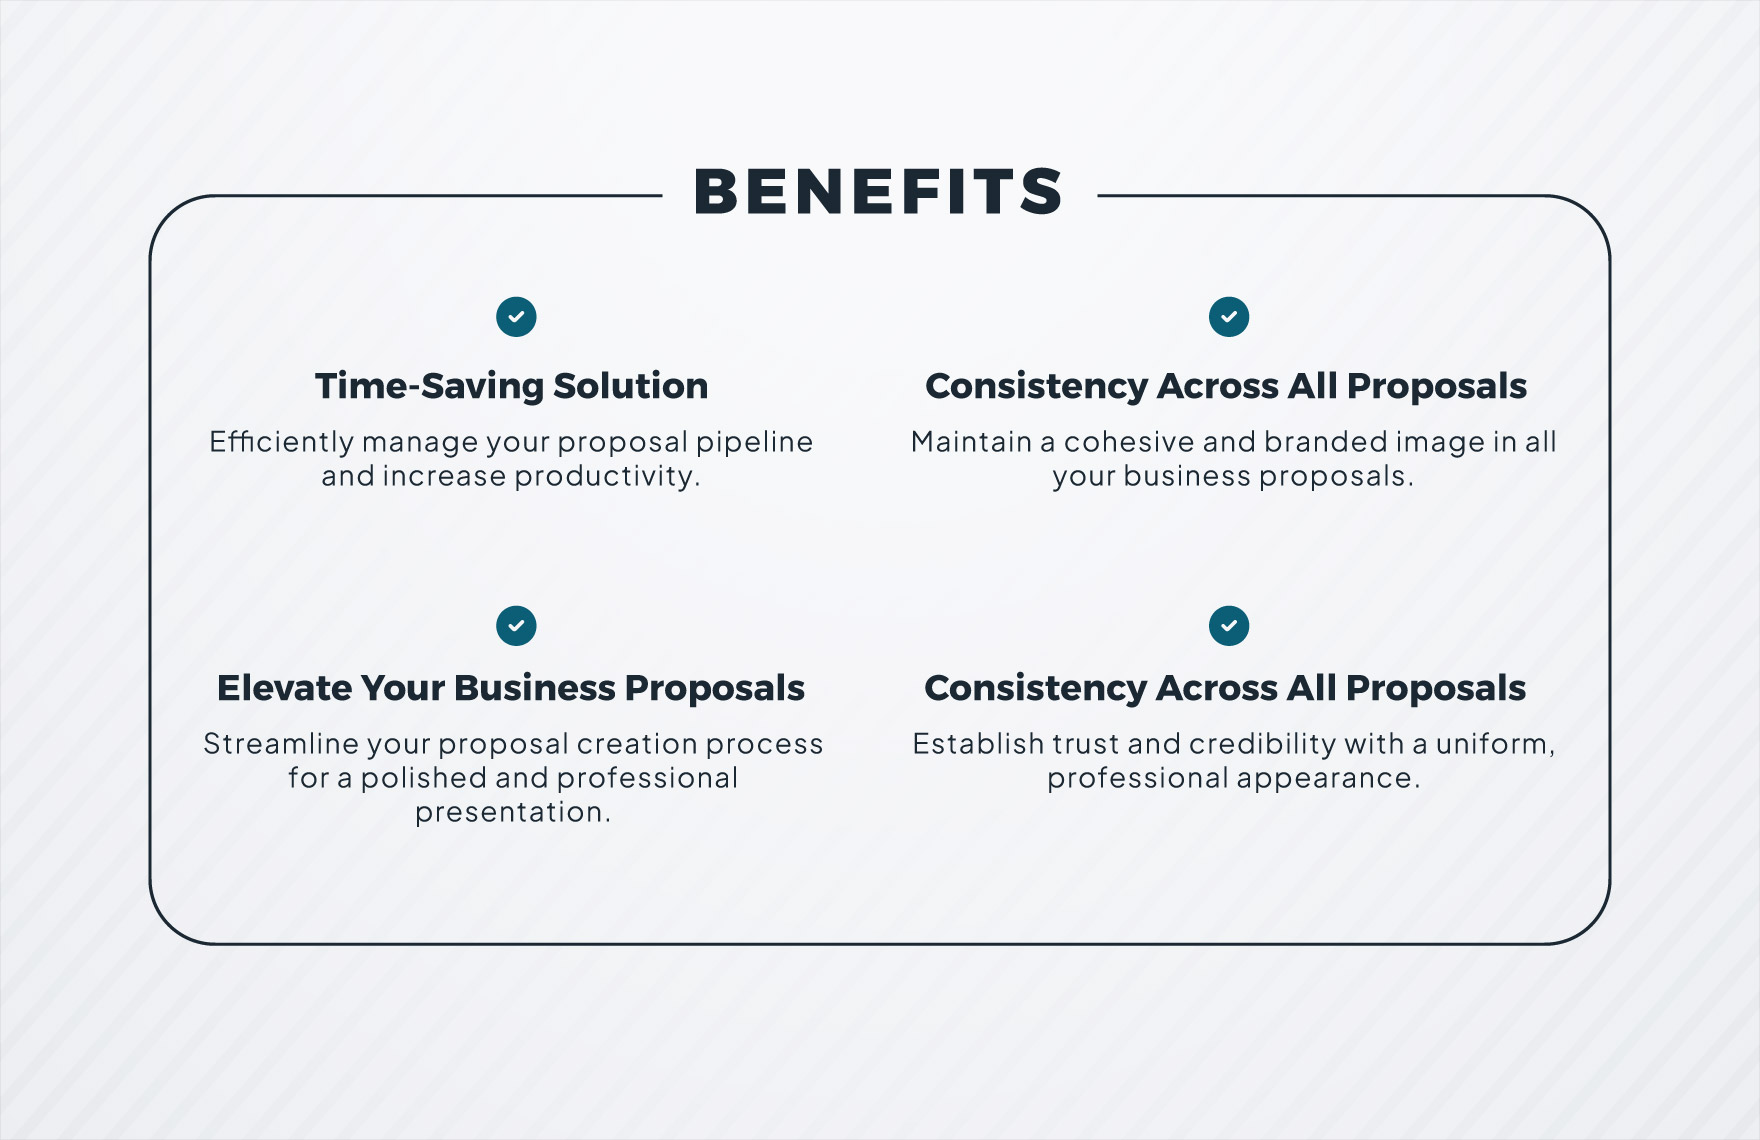 Editable Pricing Proposal Template